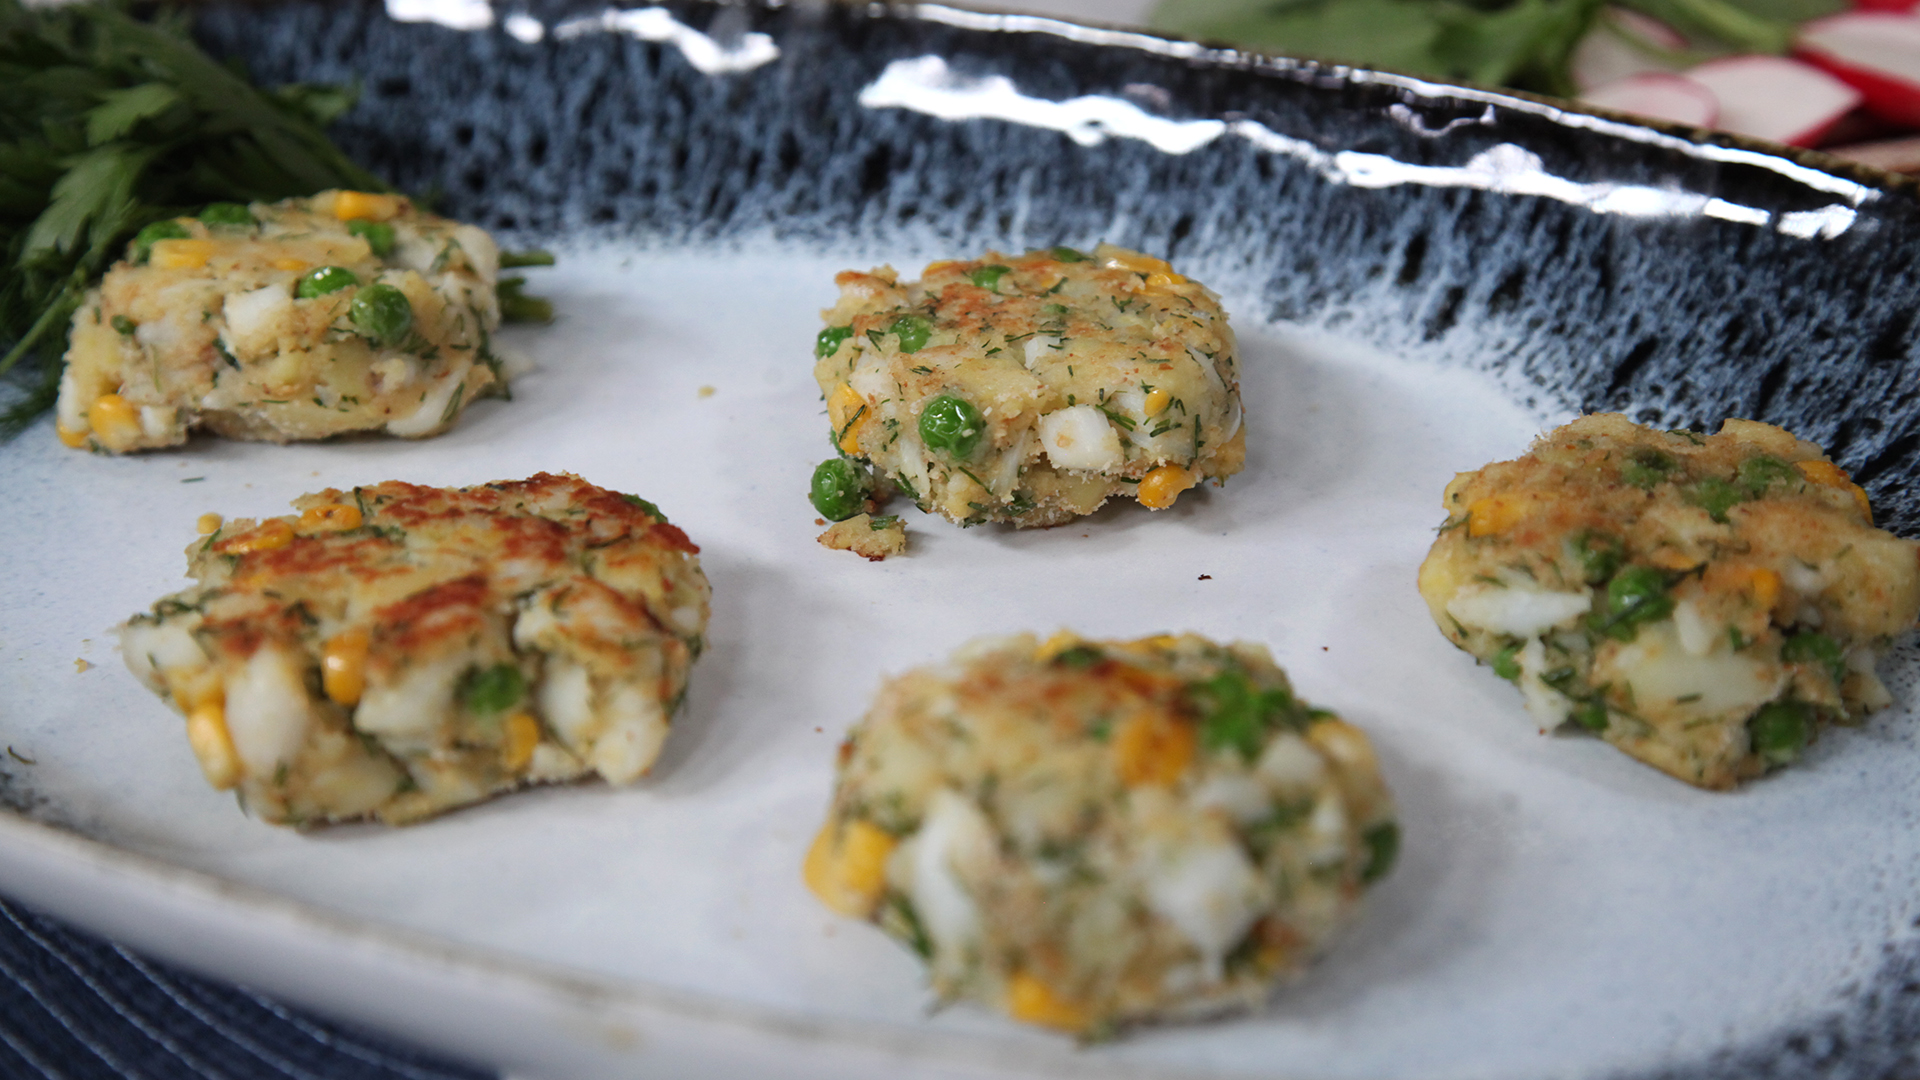 Smarty pants fish cakes